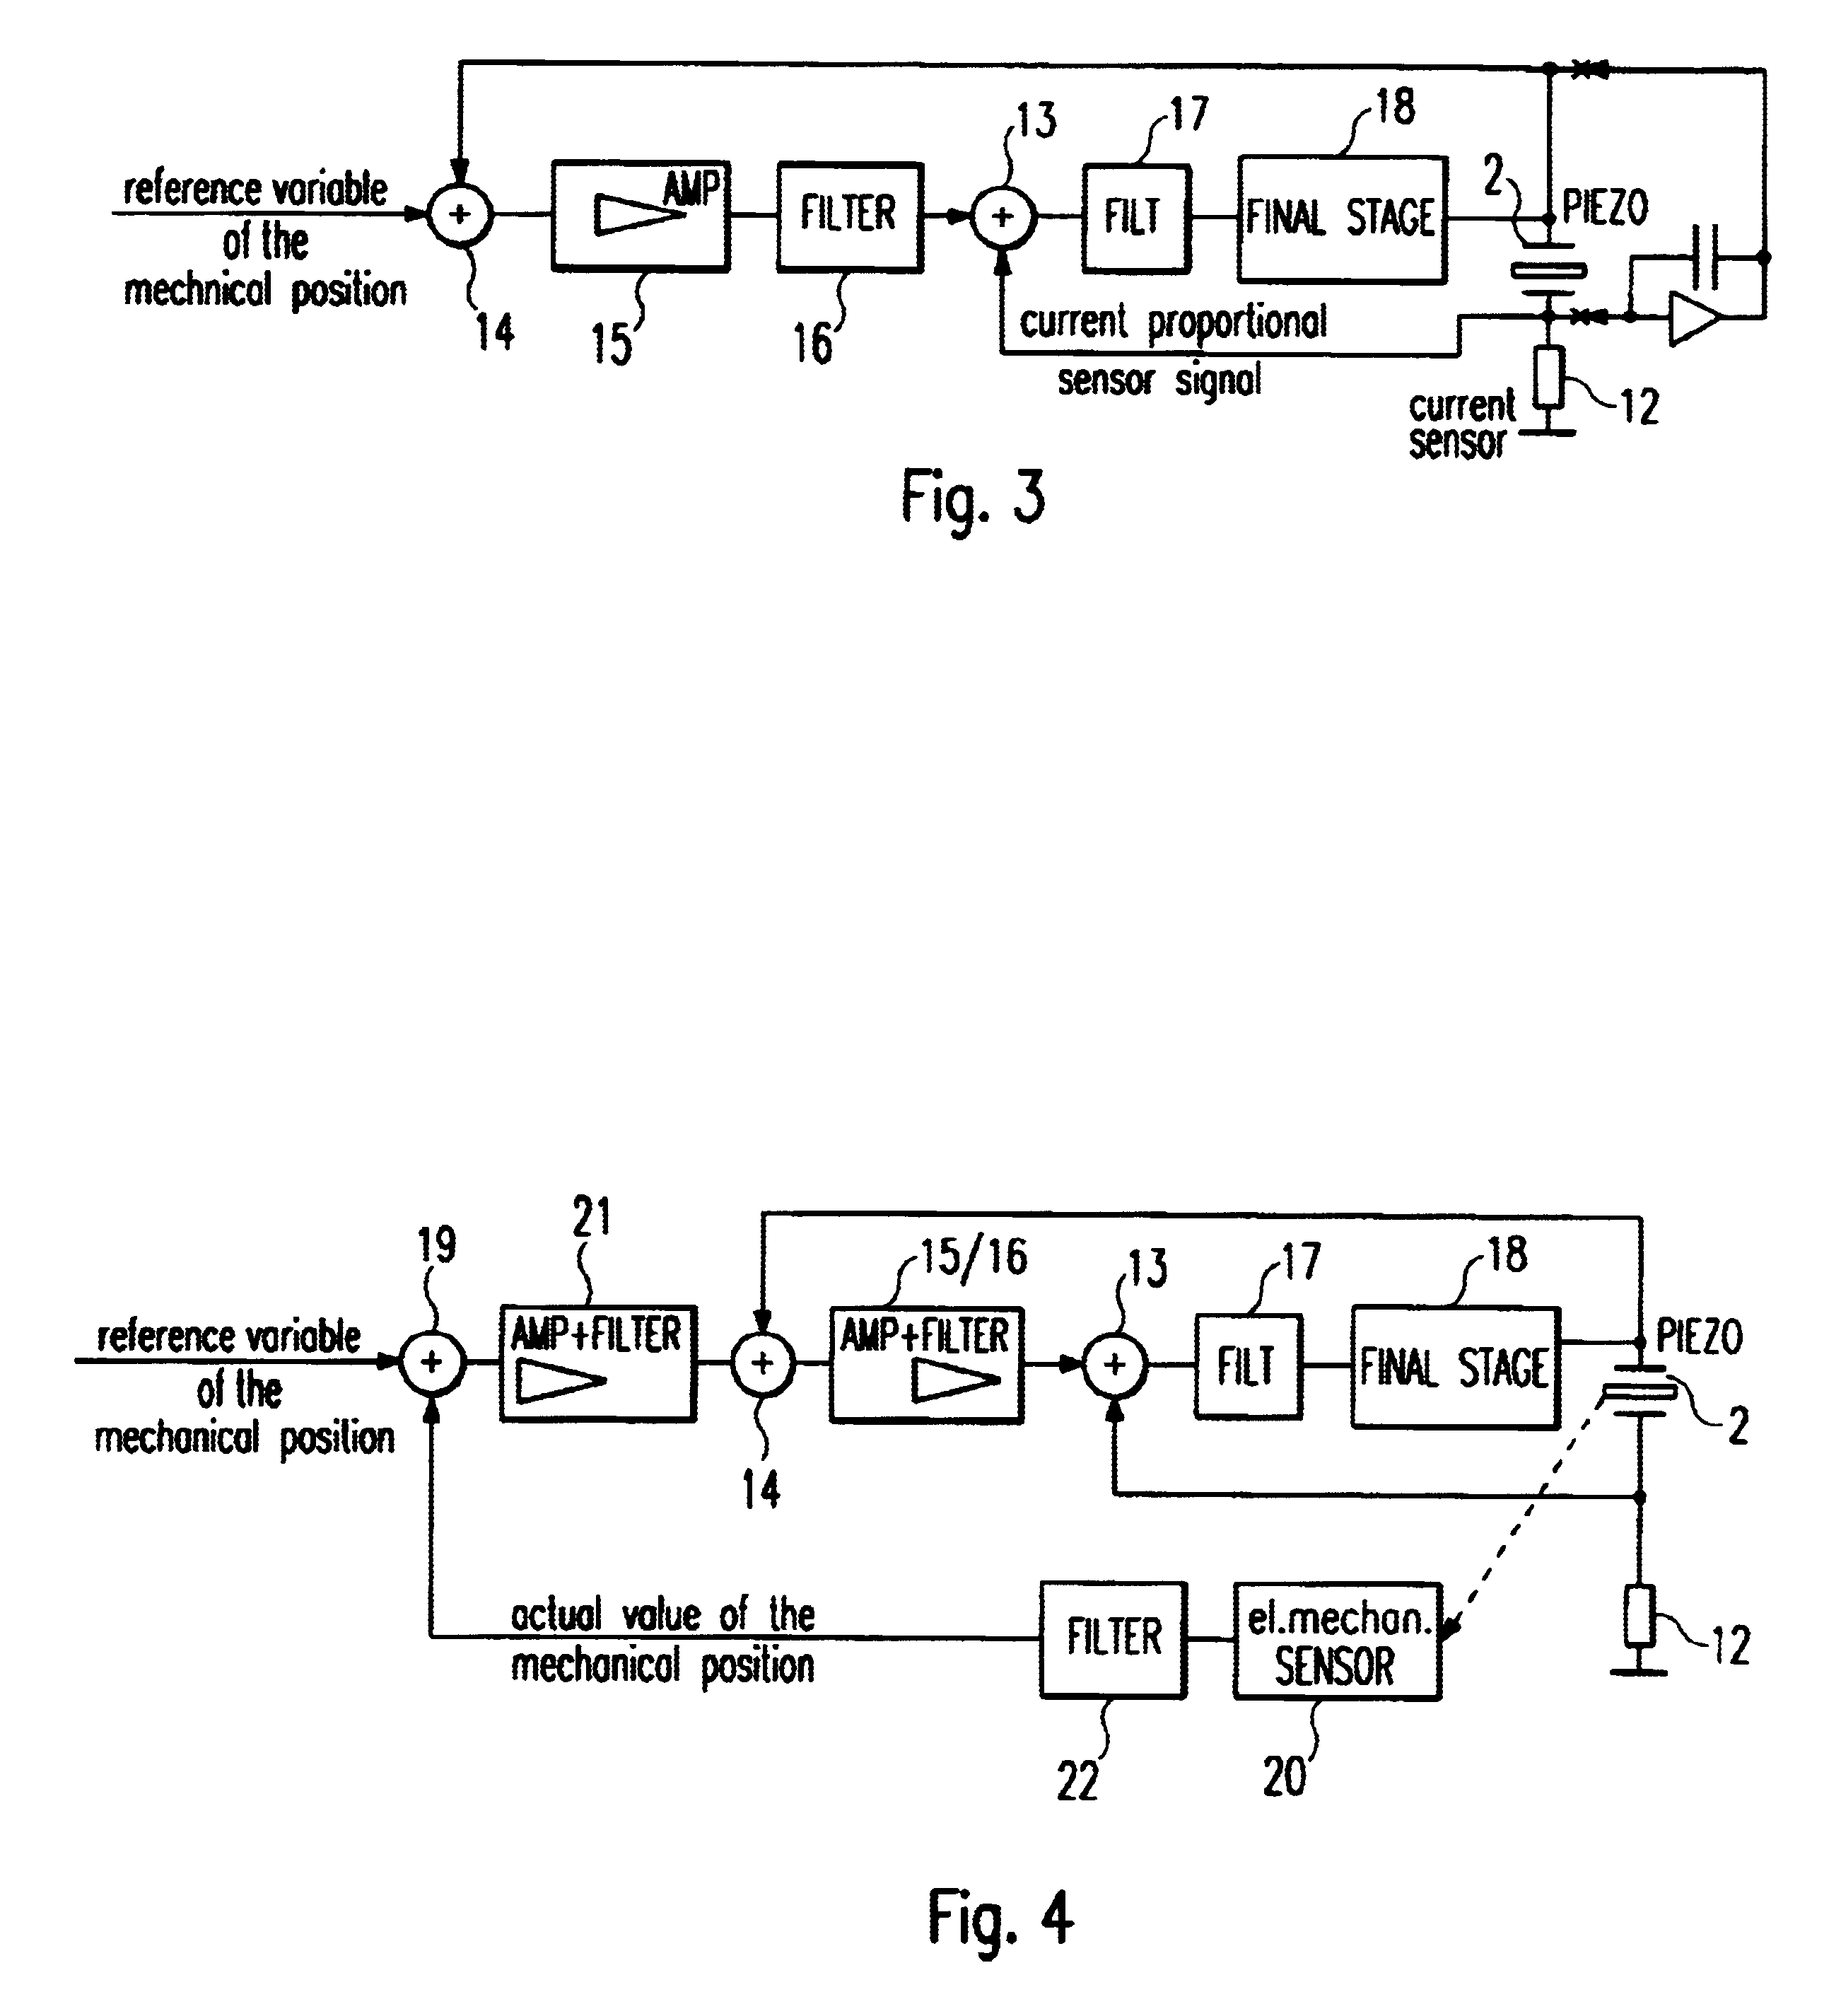 Circuit for the dynamic control of ceramic solid-state actuators